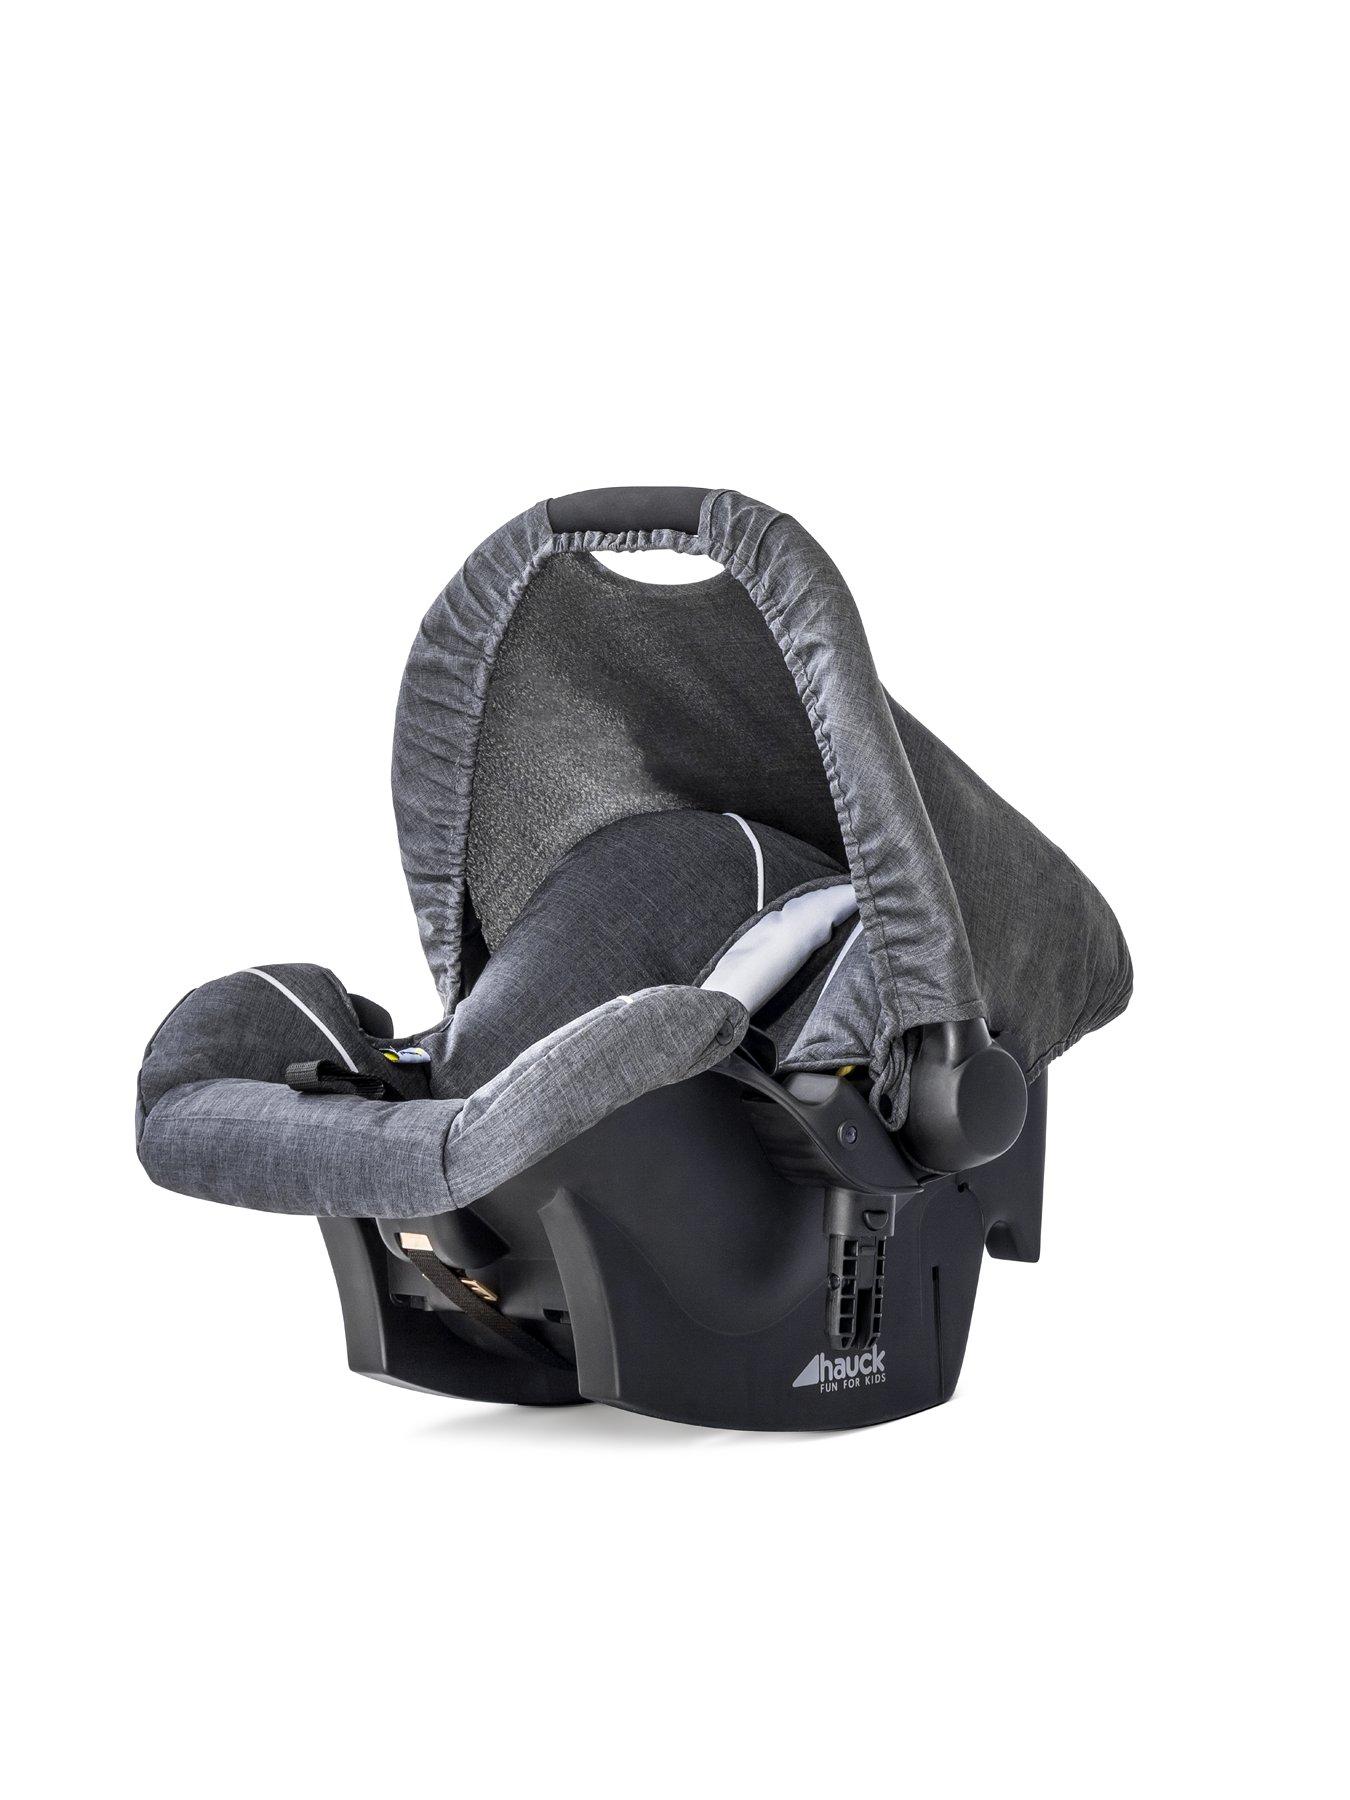 hauck pacific 4 travel system reviews